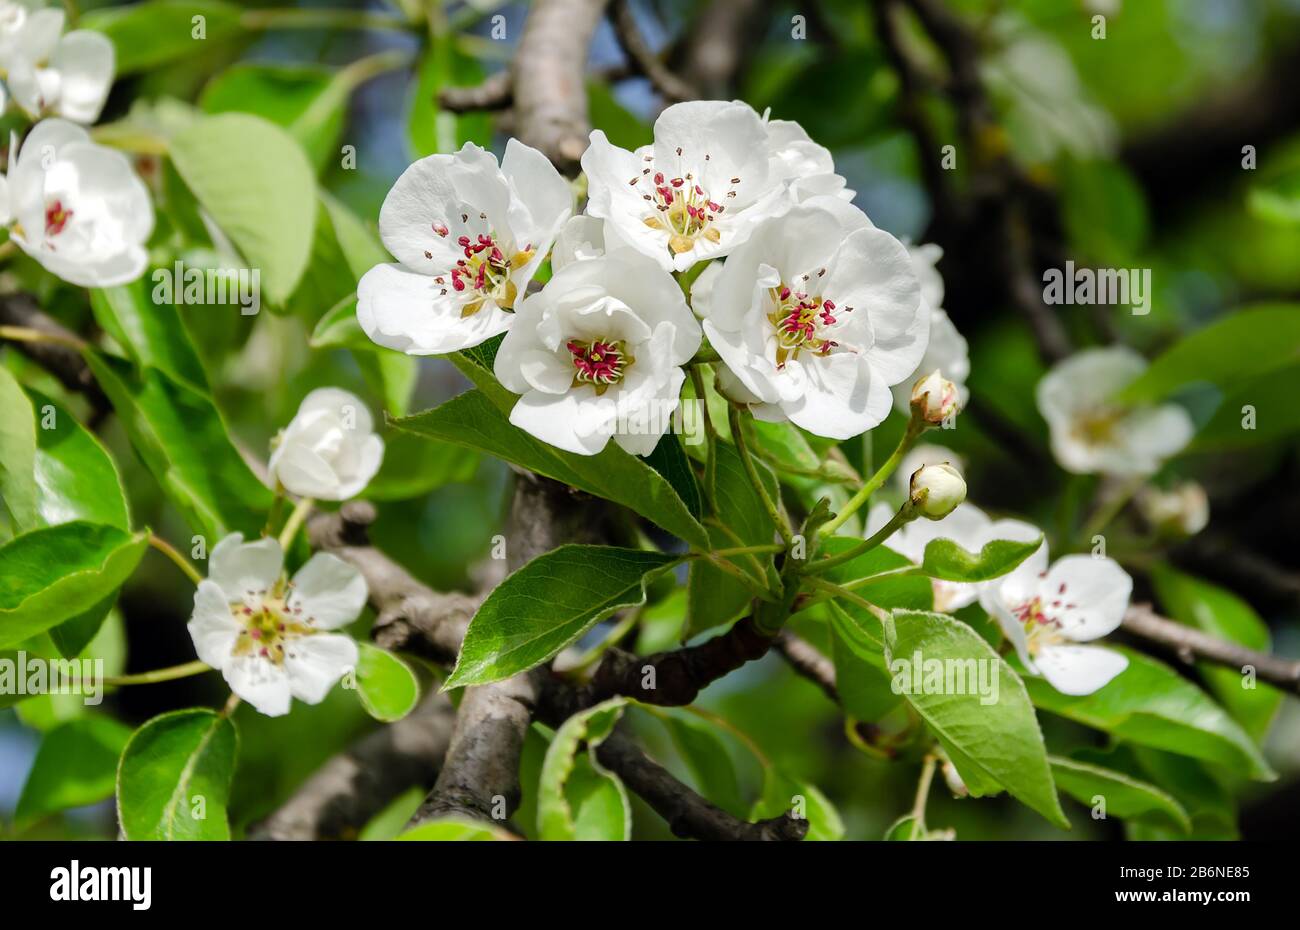 pear flowers with white petals and red stamens, flowering branch of a fruit tree, spring warm day, in the garden, close-up Stock Photo